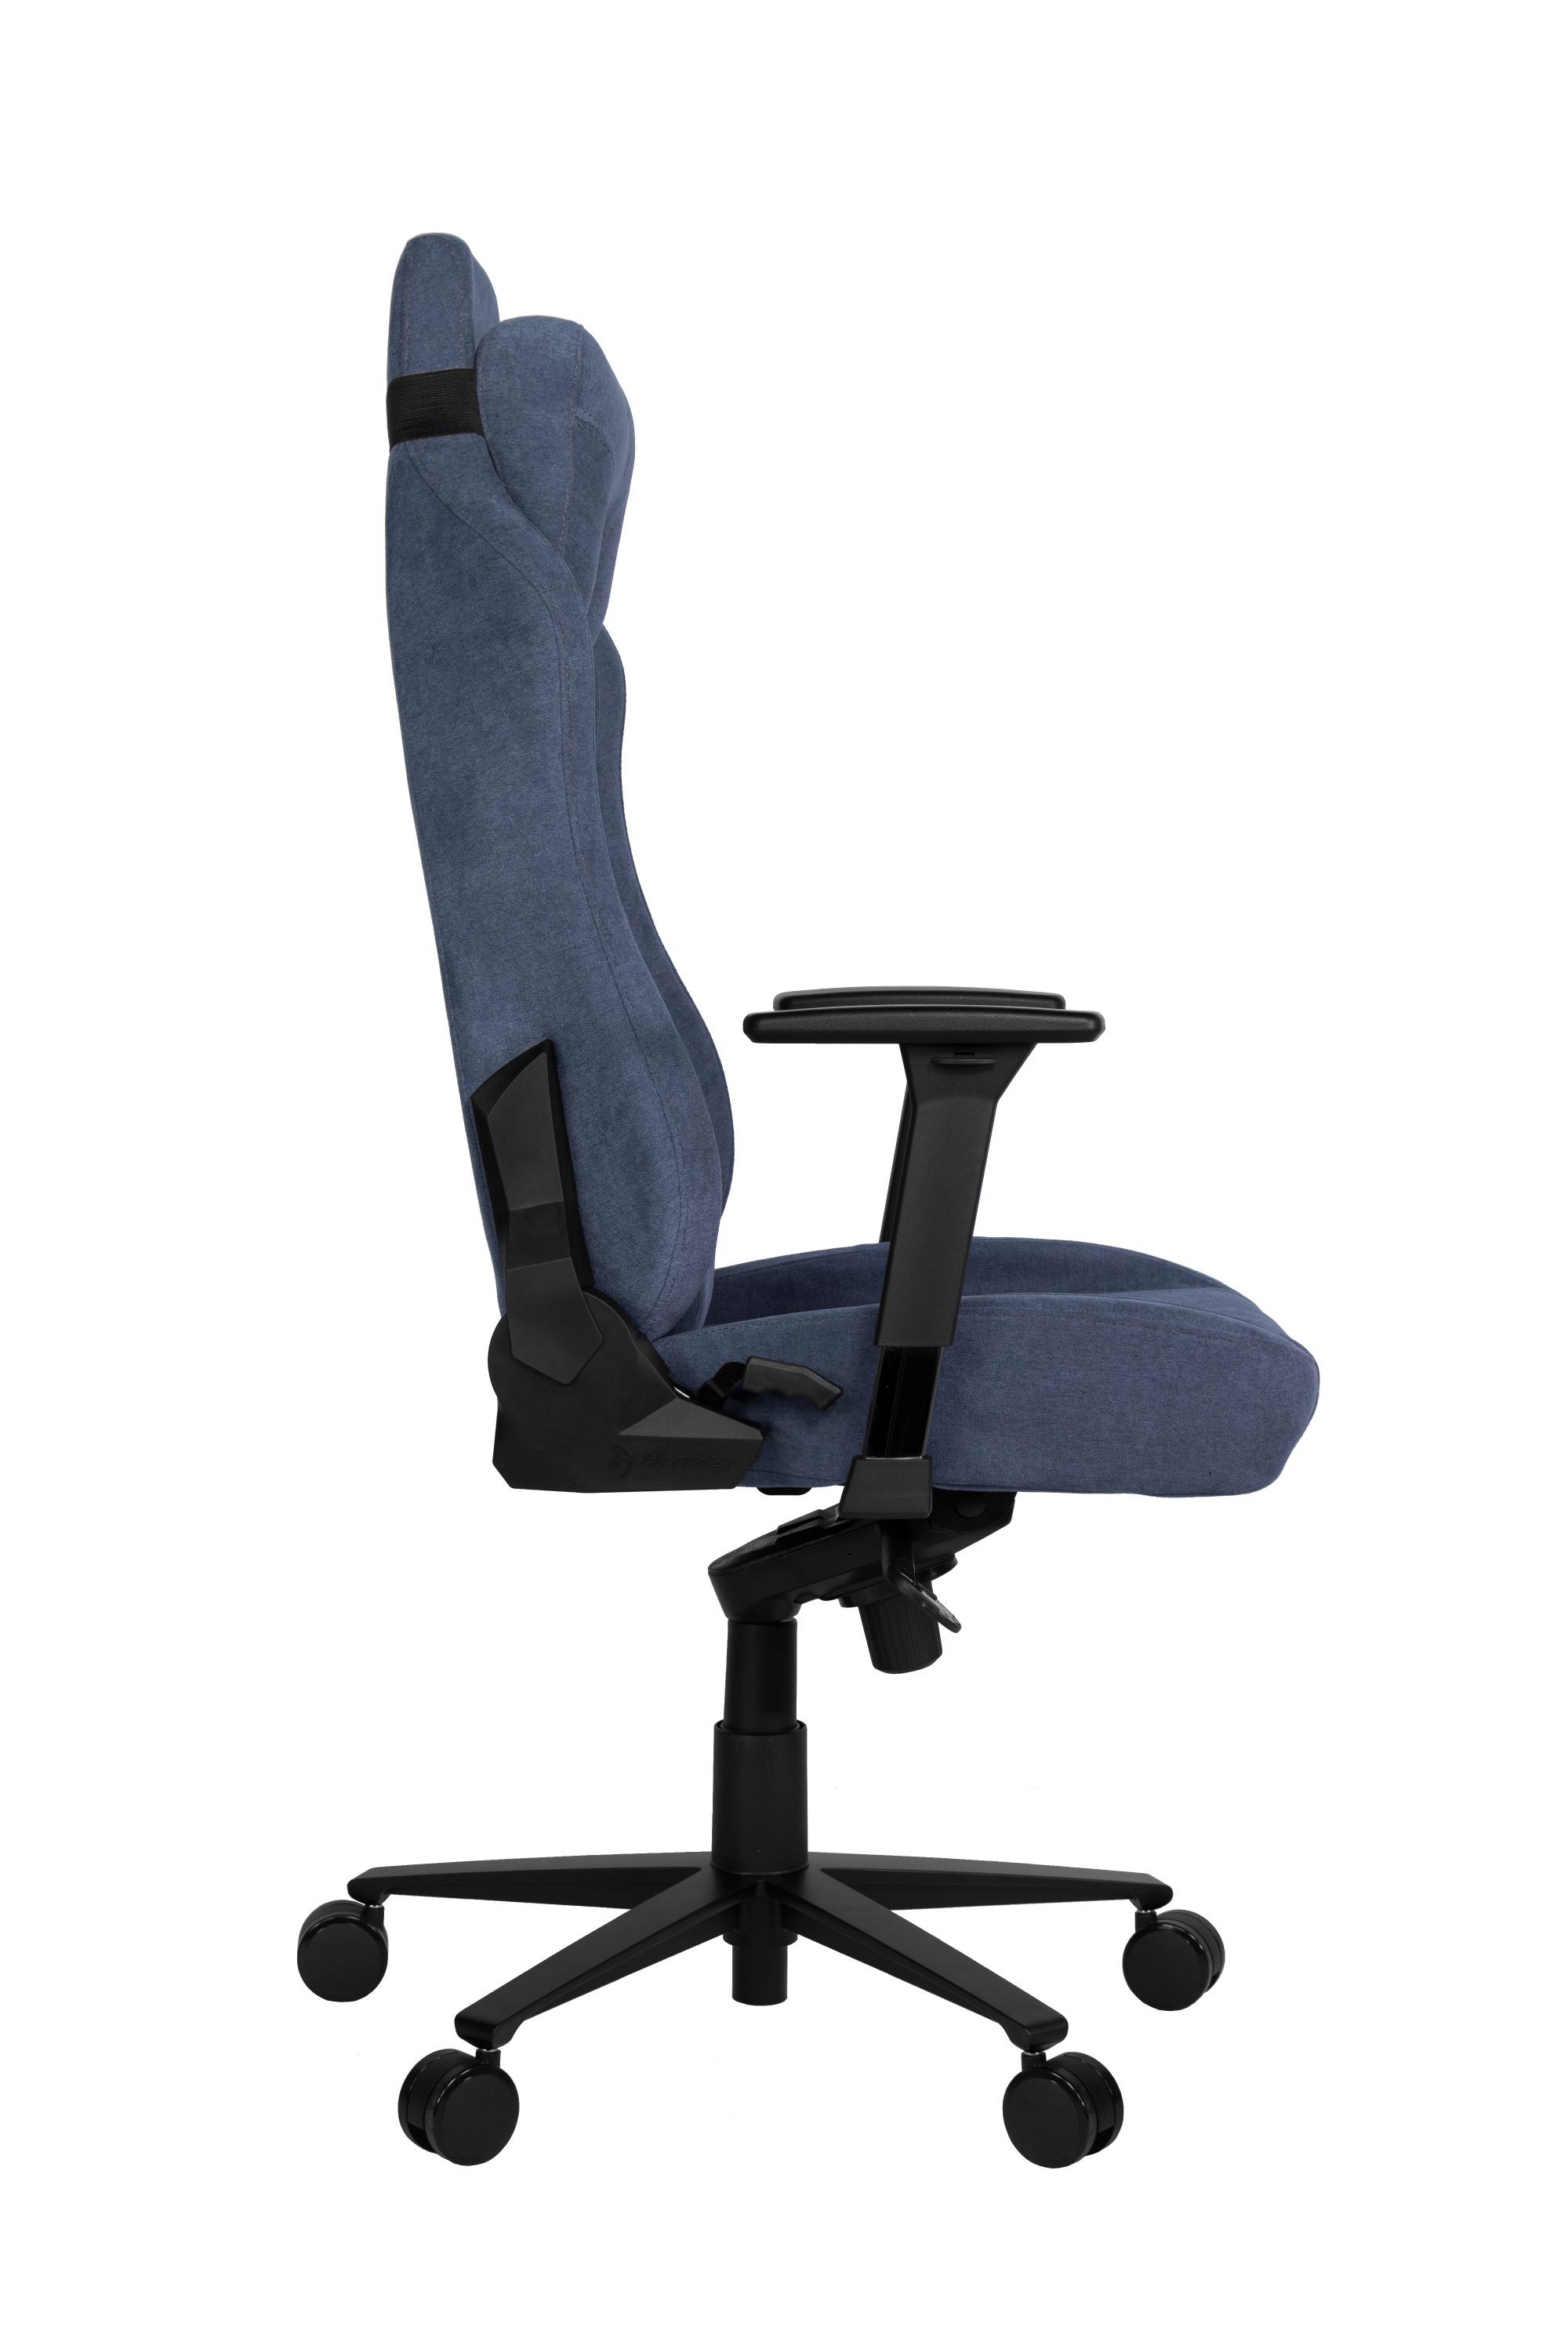 Arozzi VERNAZZA SOFT FABRIC  Blue gaming chair